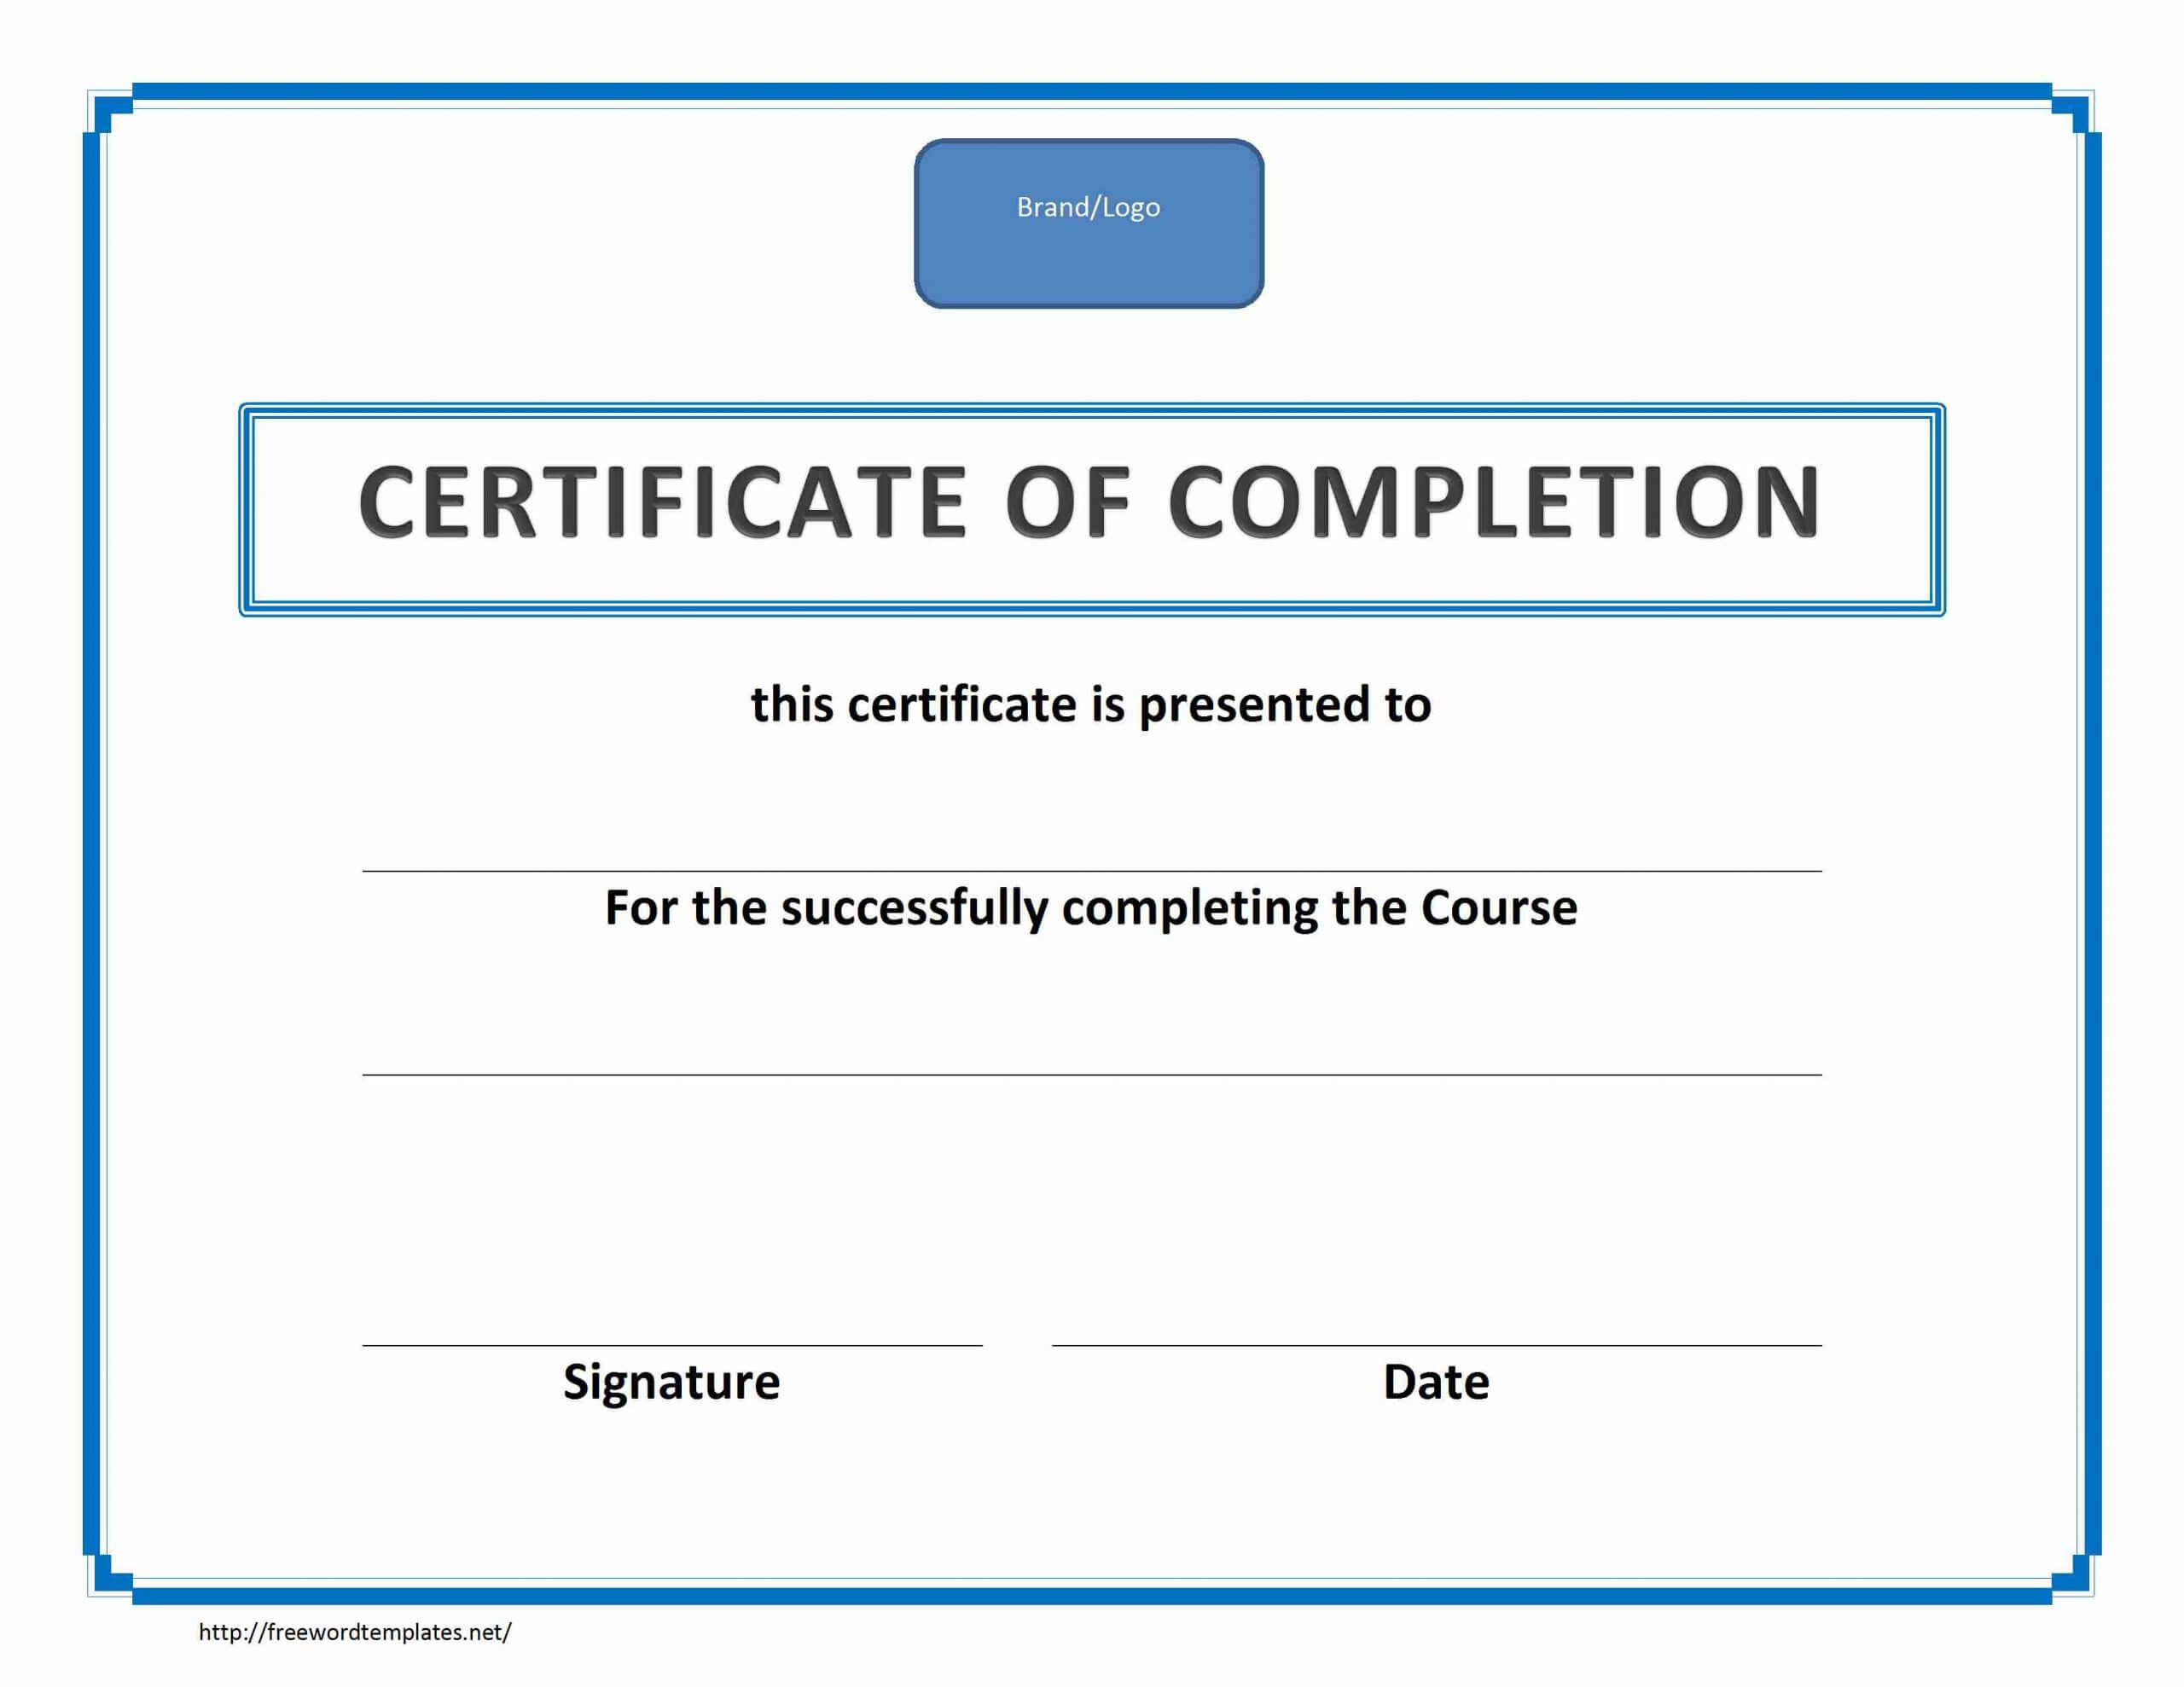 Certificate Of Training Completion Template Word 2010 In Certificate Of Completion Word Template